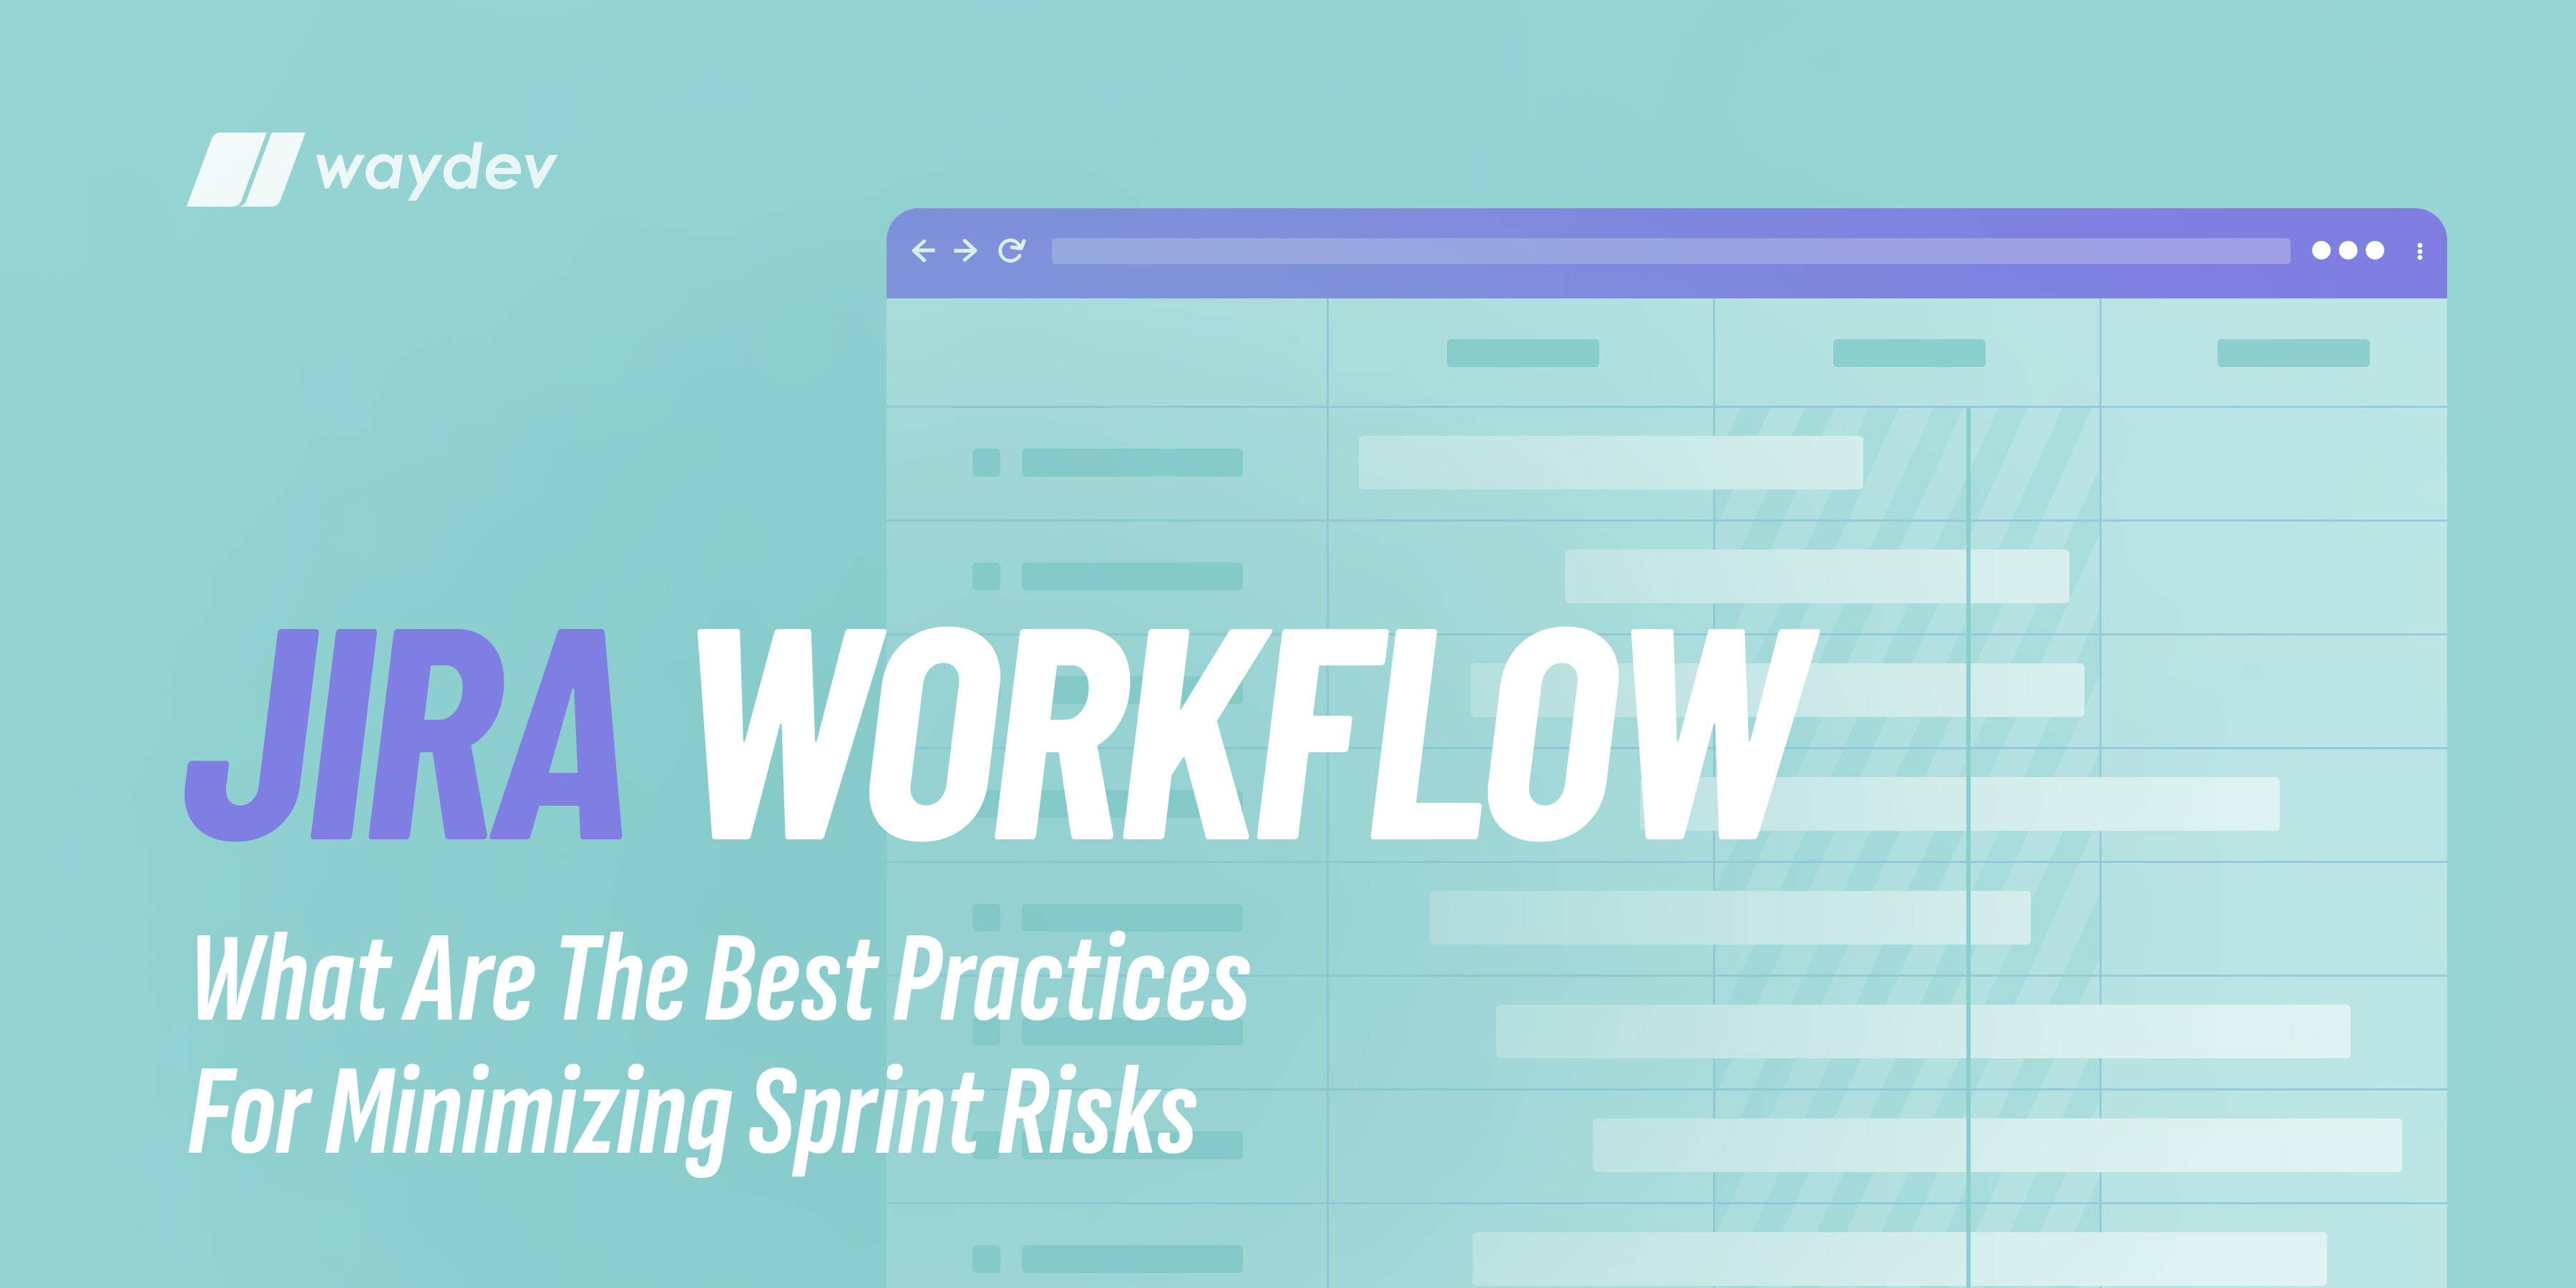 Jira Workflow: What Are the Best Practices for Minimizing Sprint Risks